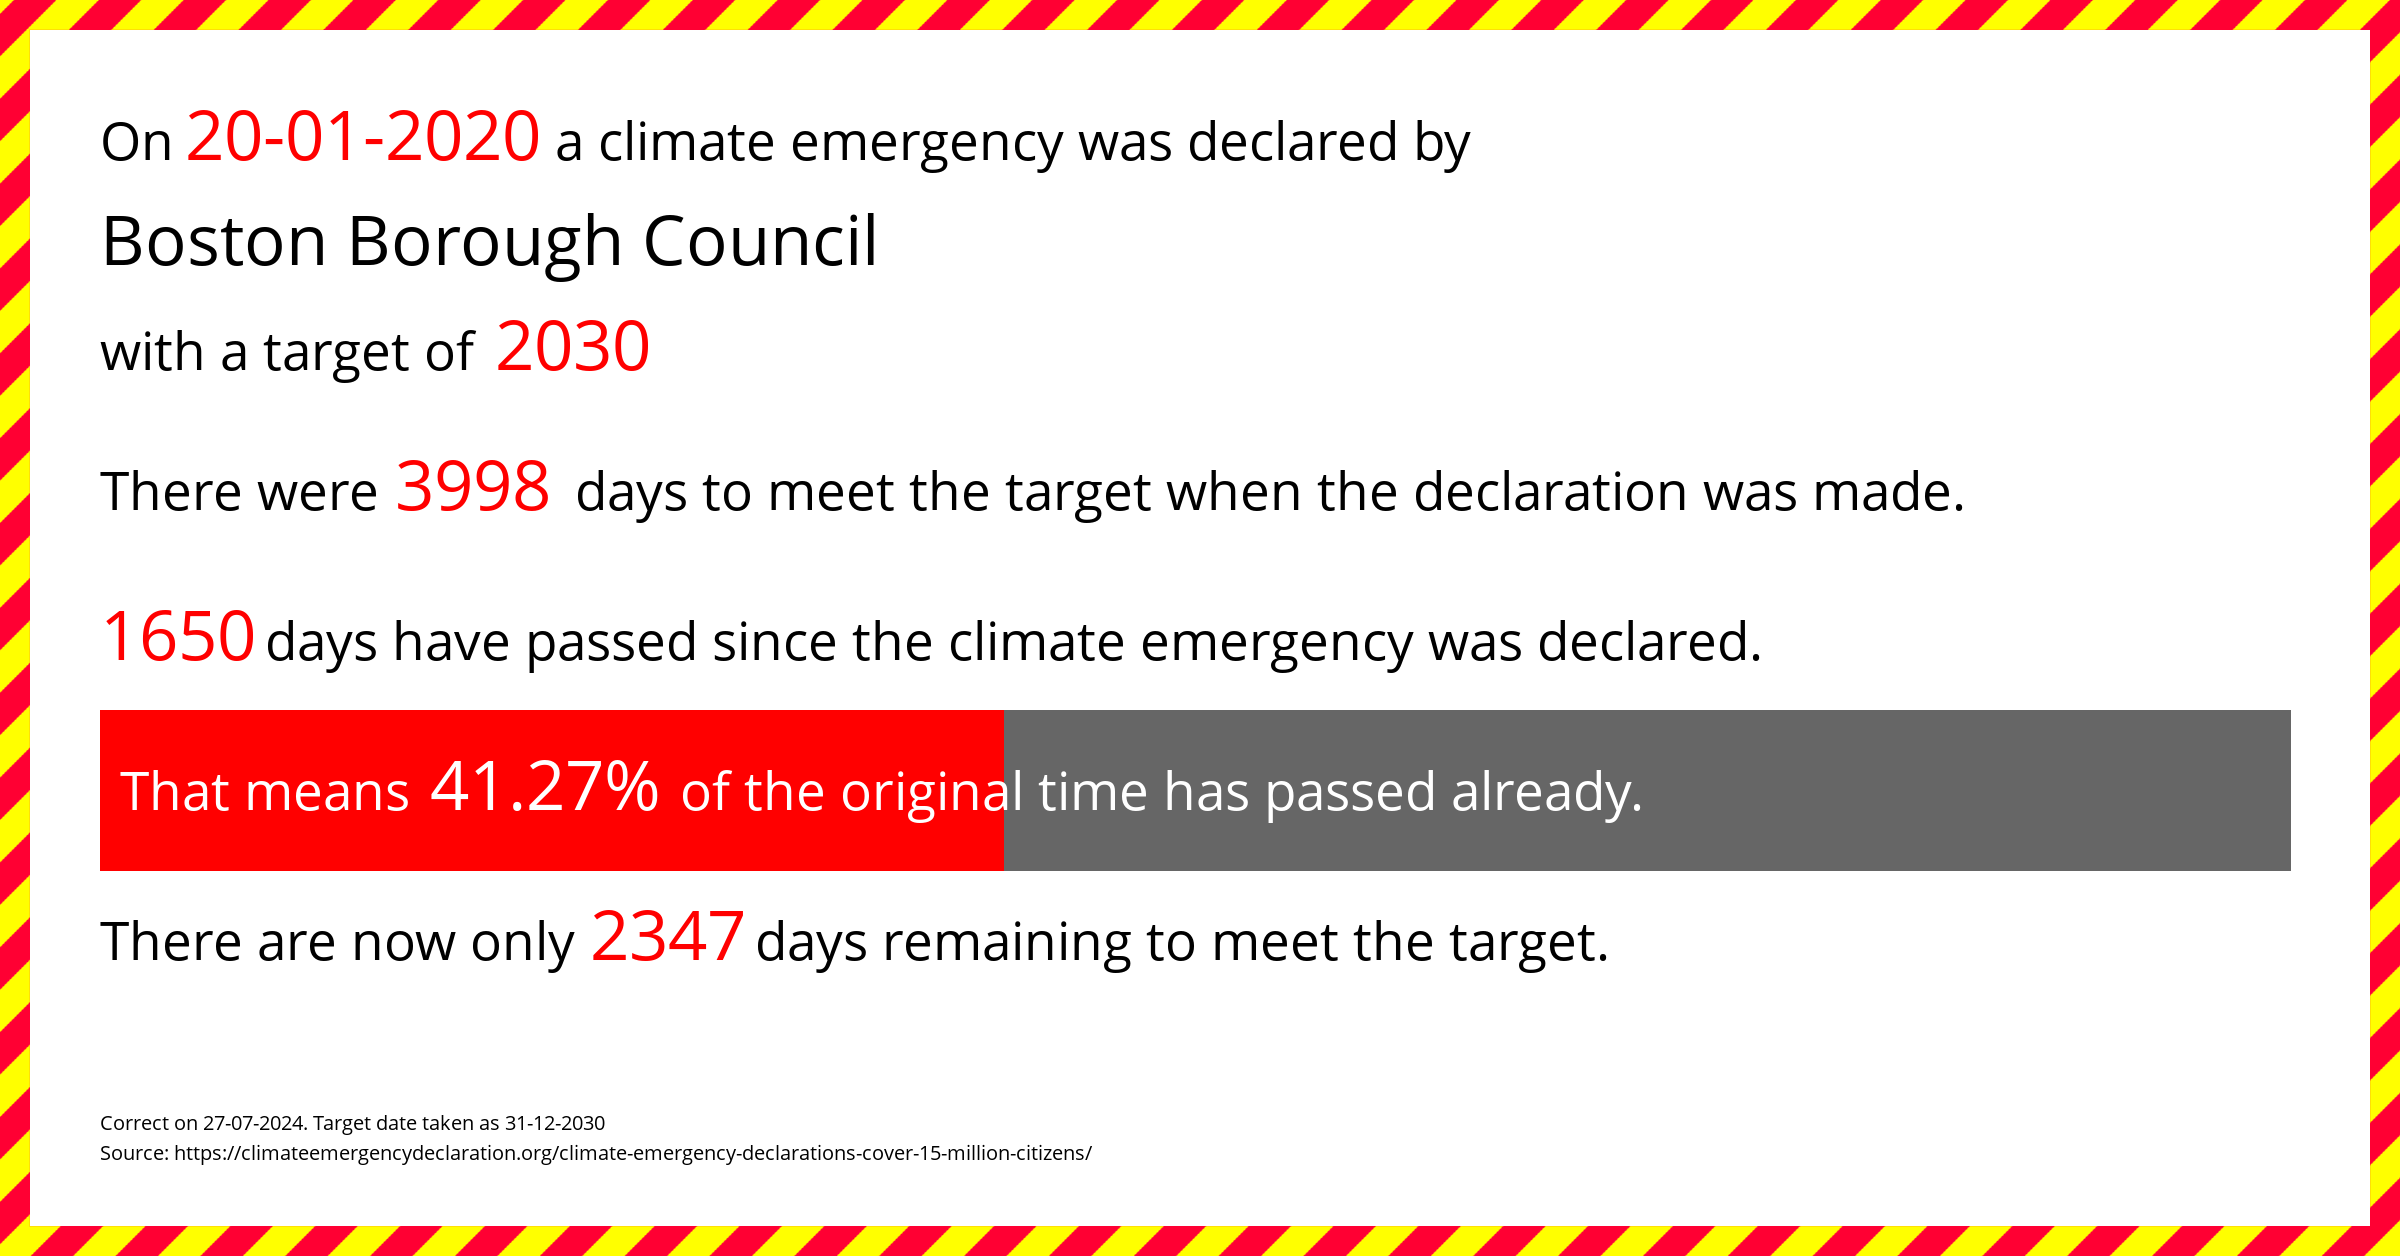 Boston Borough Council declared a Climate emergency on Monday 20th January 2020, with a target of 2030.